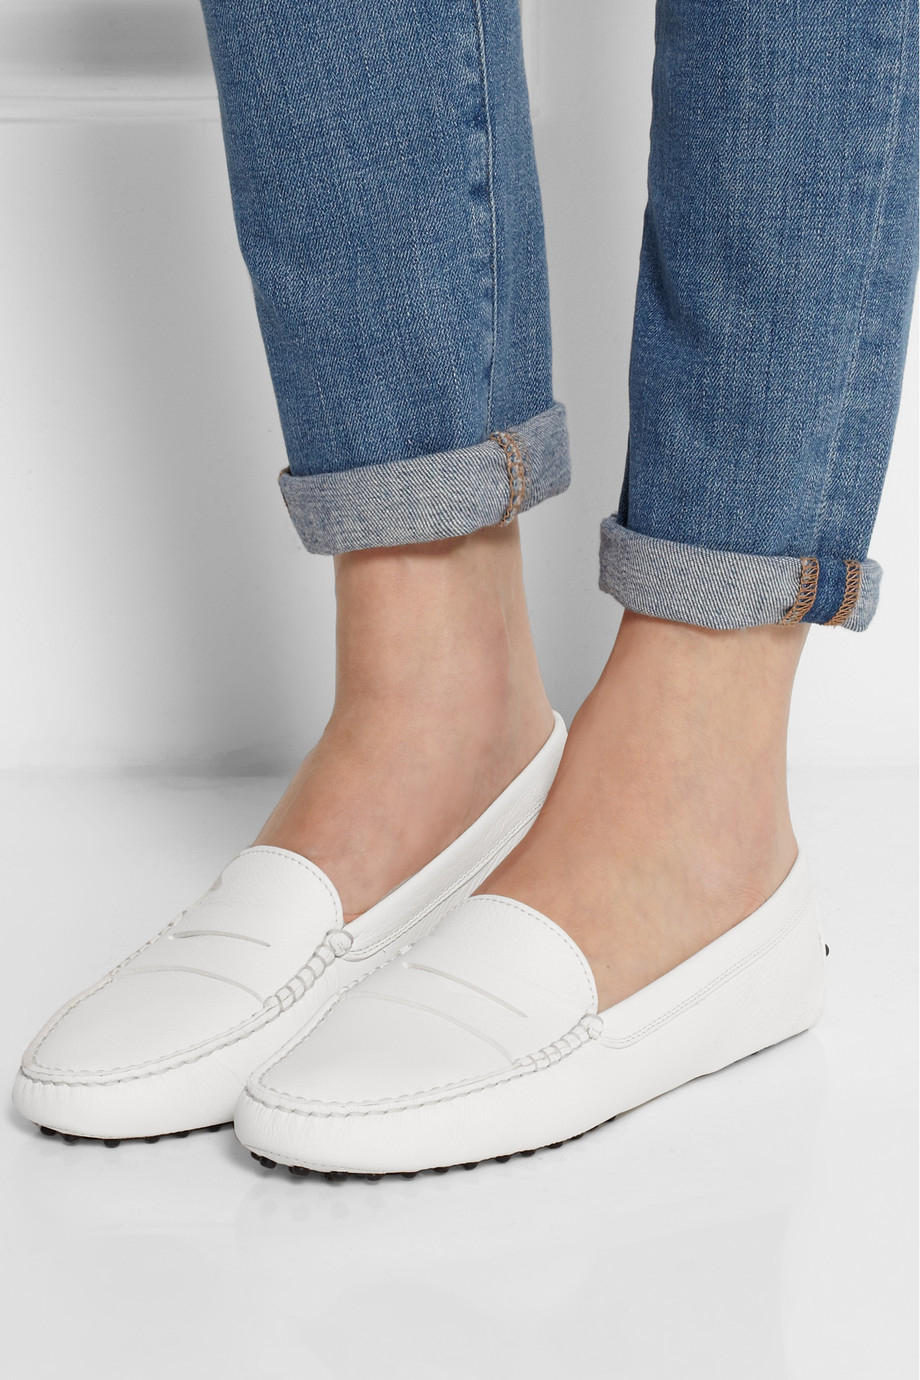 tod's white loafers